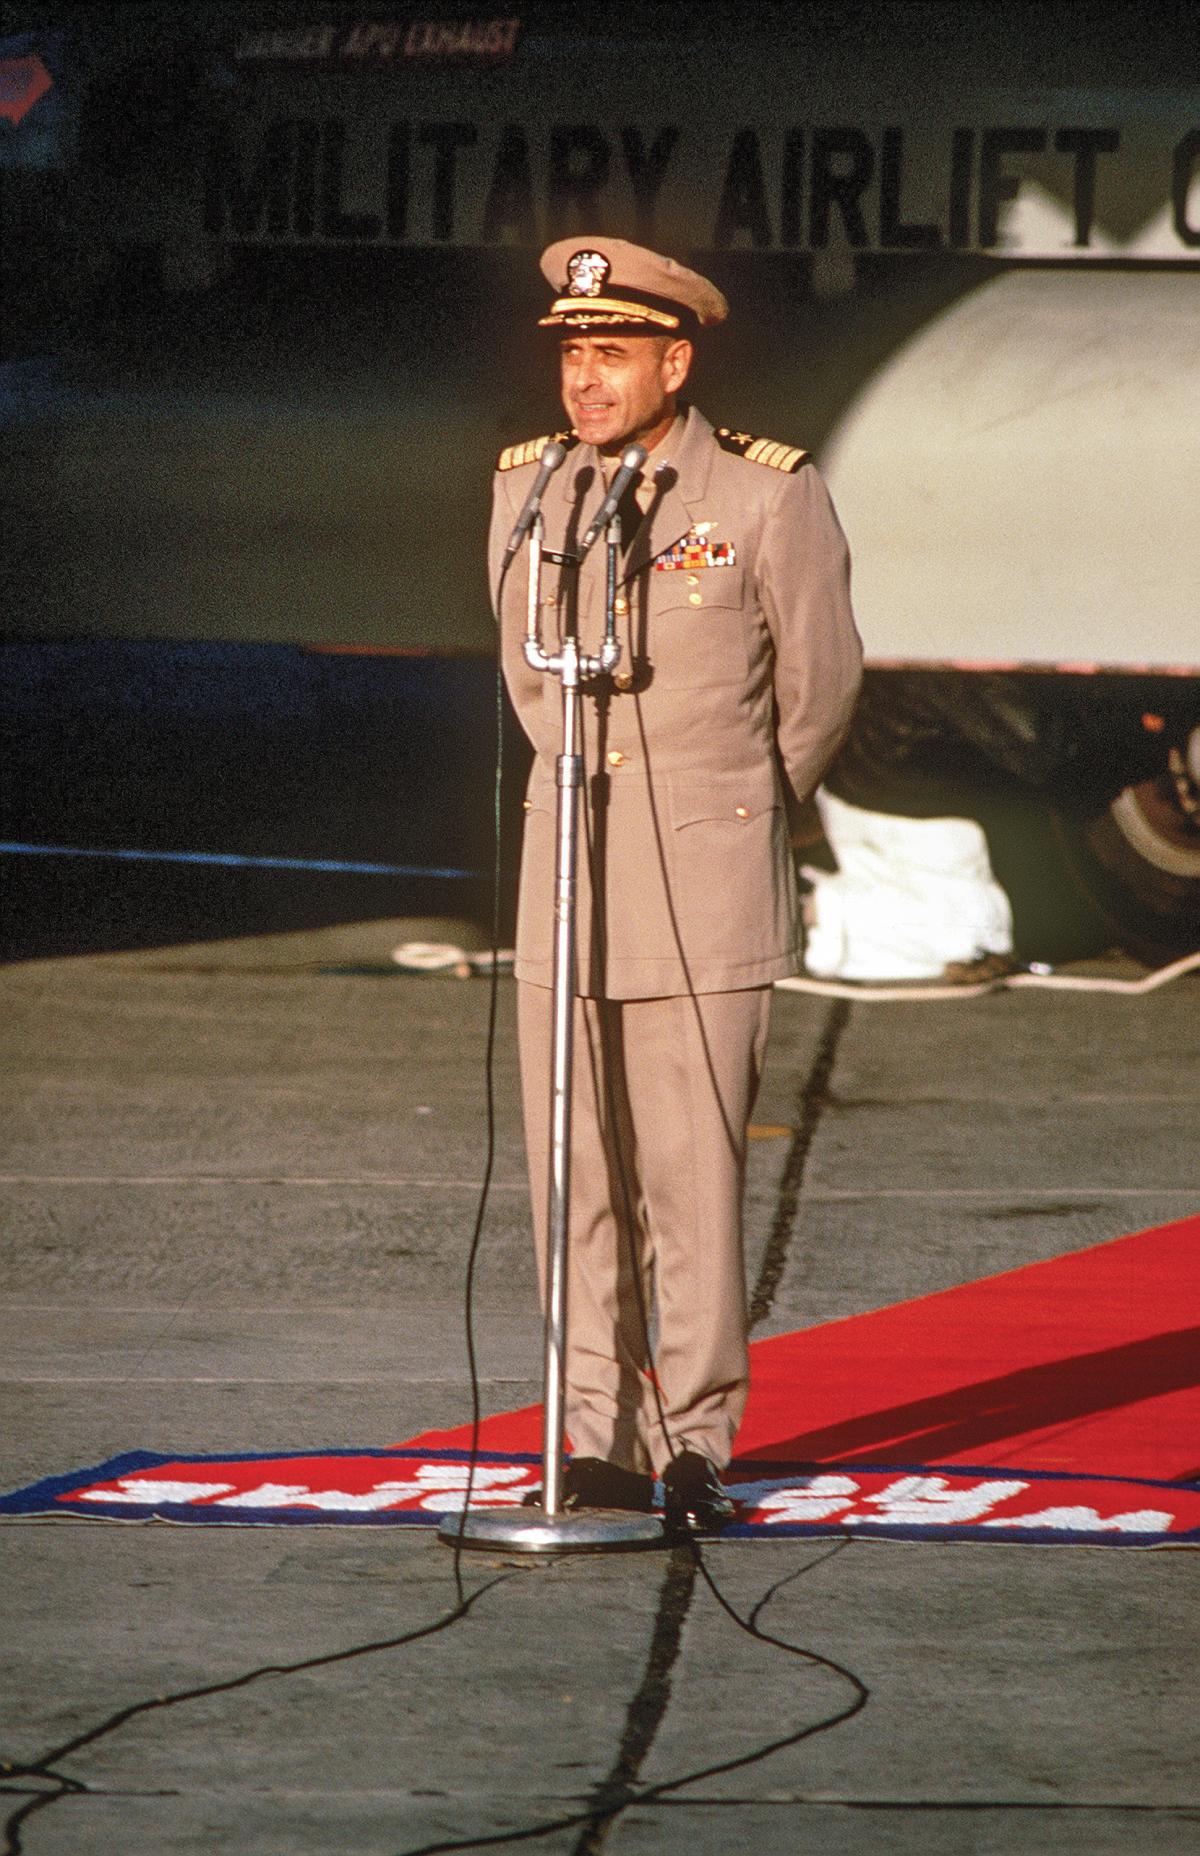 Captain Jeremiah Denton delivering remarks at Clark Air Base, Philippines, in February 1973 in front of a C-141 Starlifter aircraft